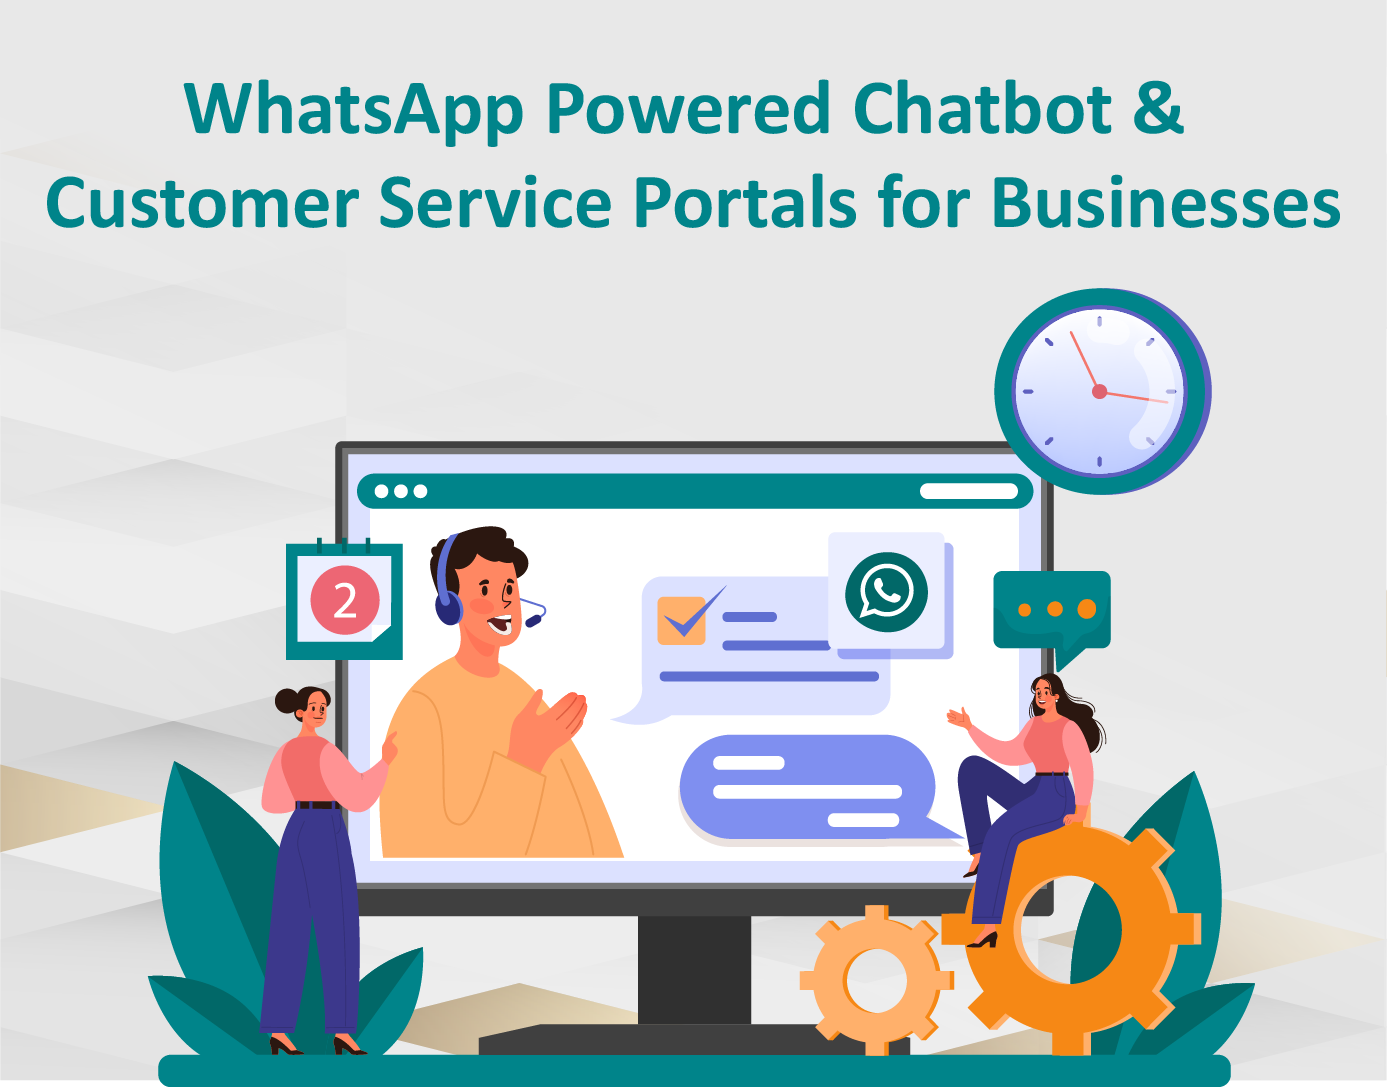 WhatsApp Powered Chatbot & Customer Service Portals for Businesses